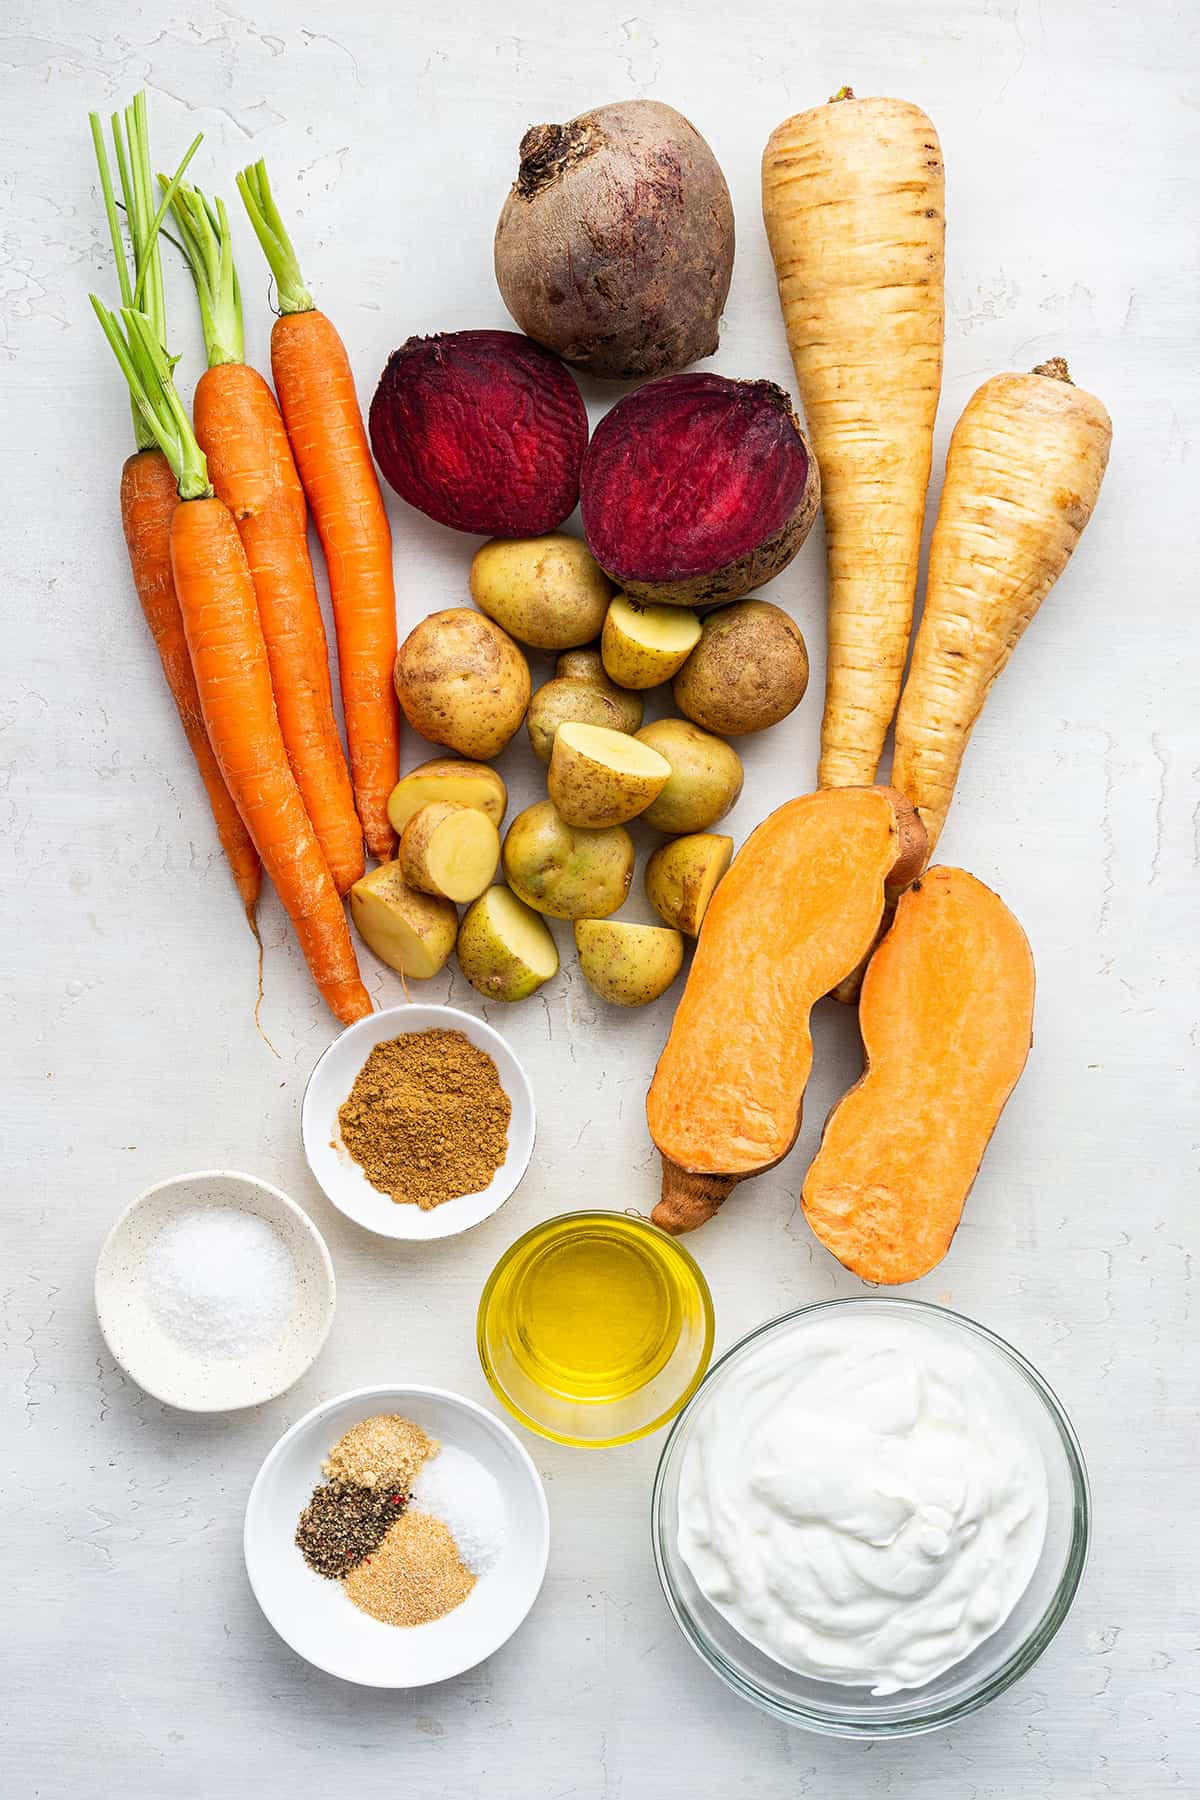 Overhead view of ingredients for oven-roasted root vegetables